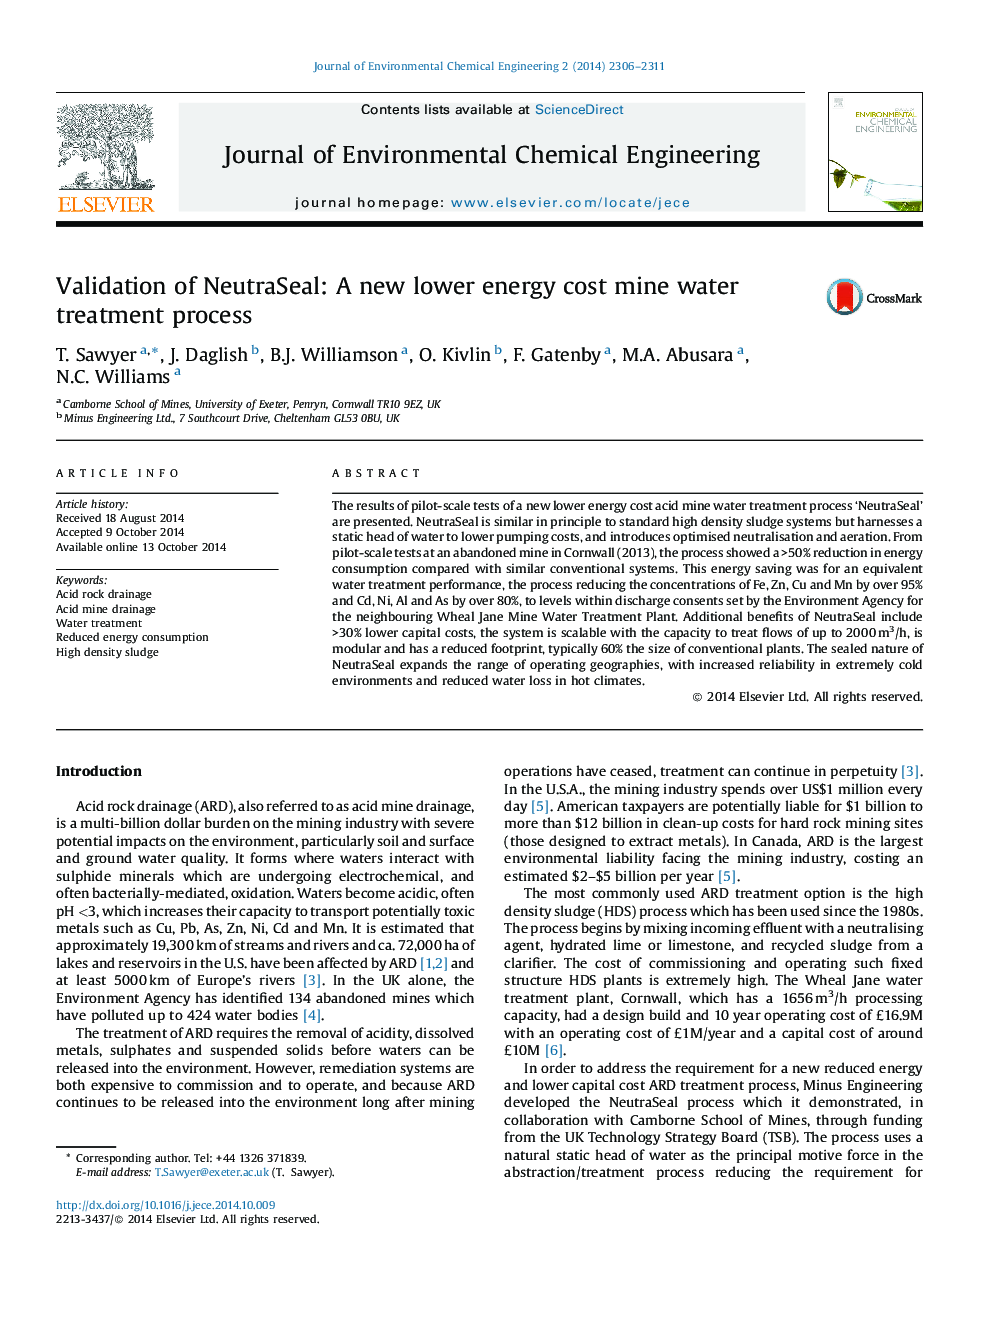 Validation of NeutraSeal: A new lower energy cost mine water treatment process